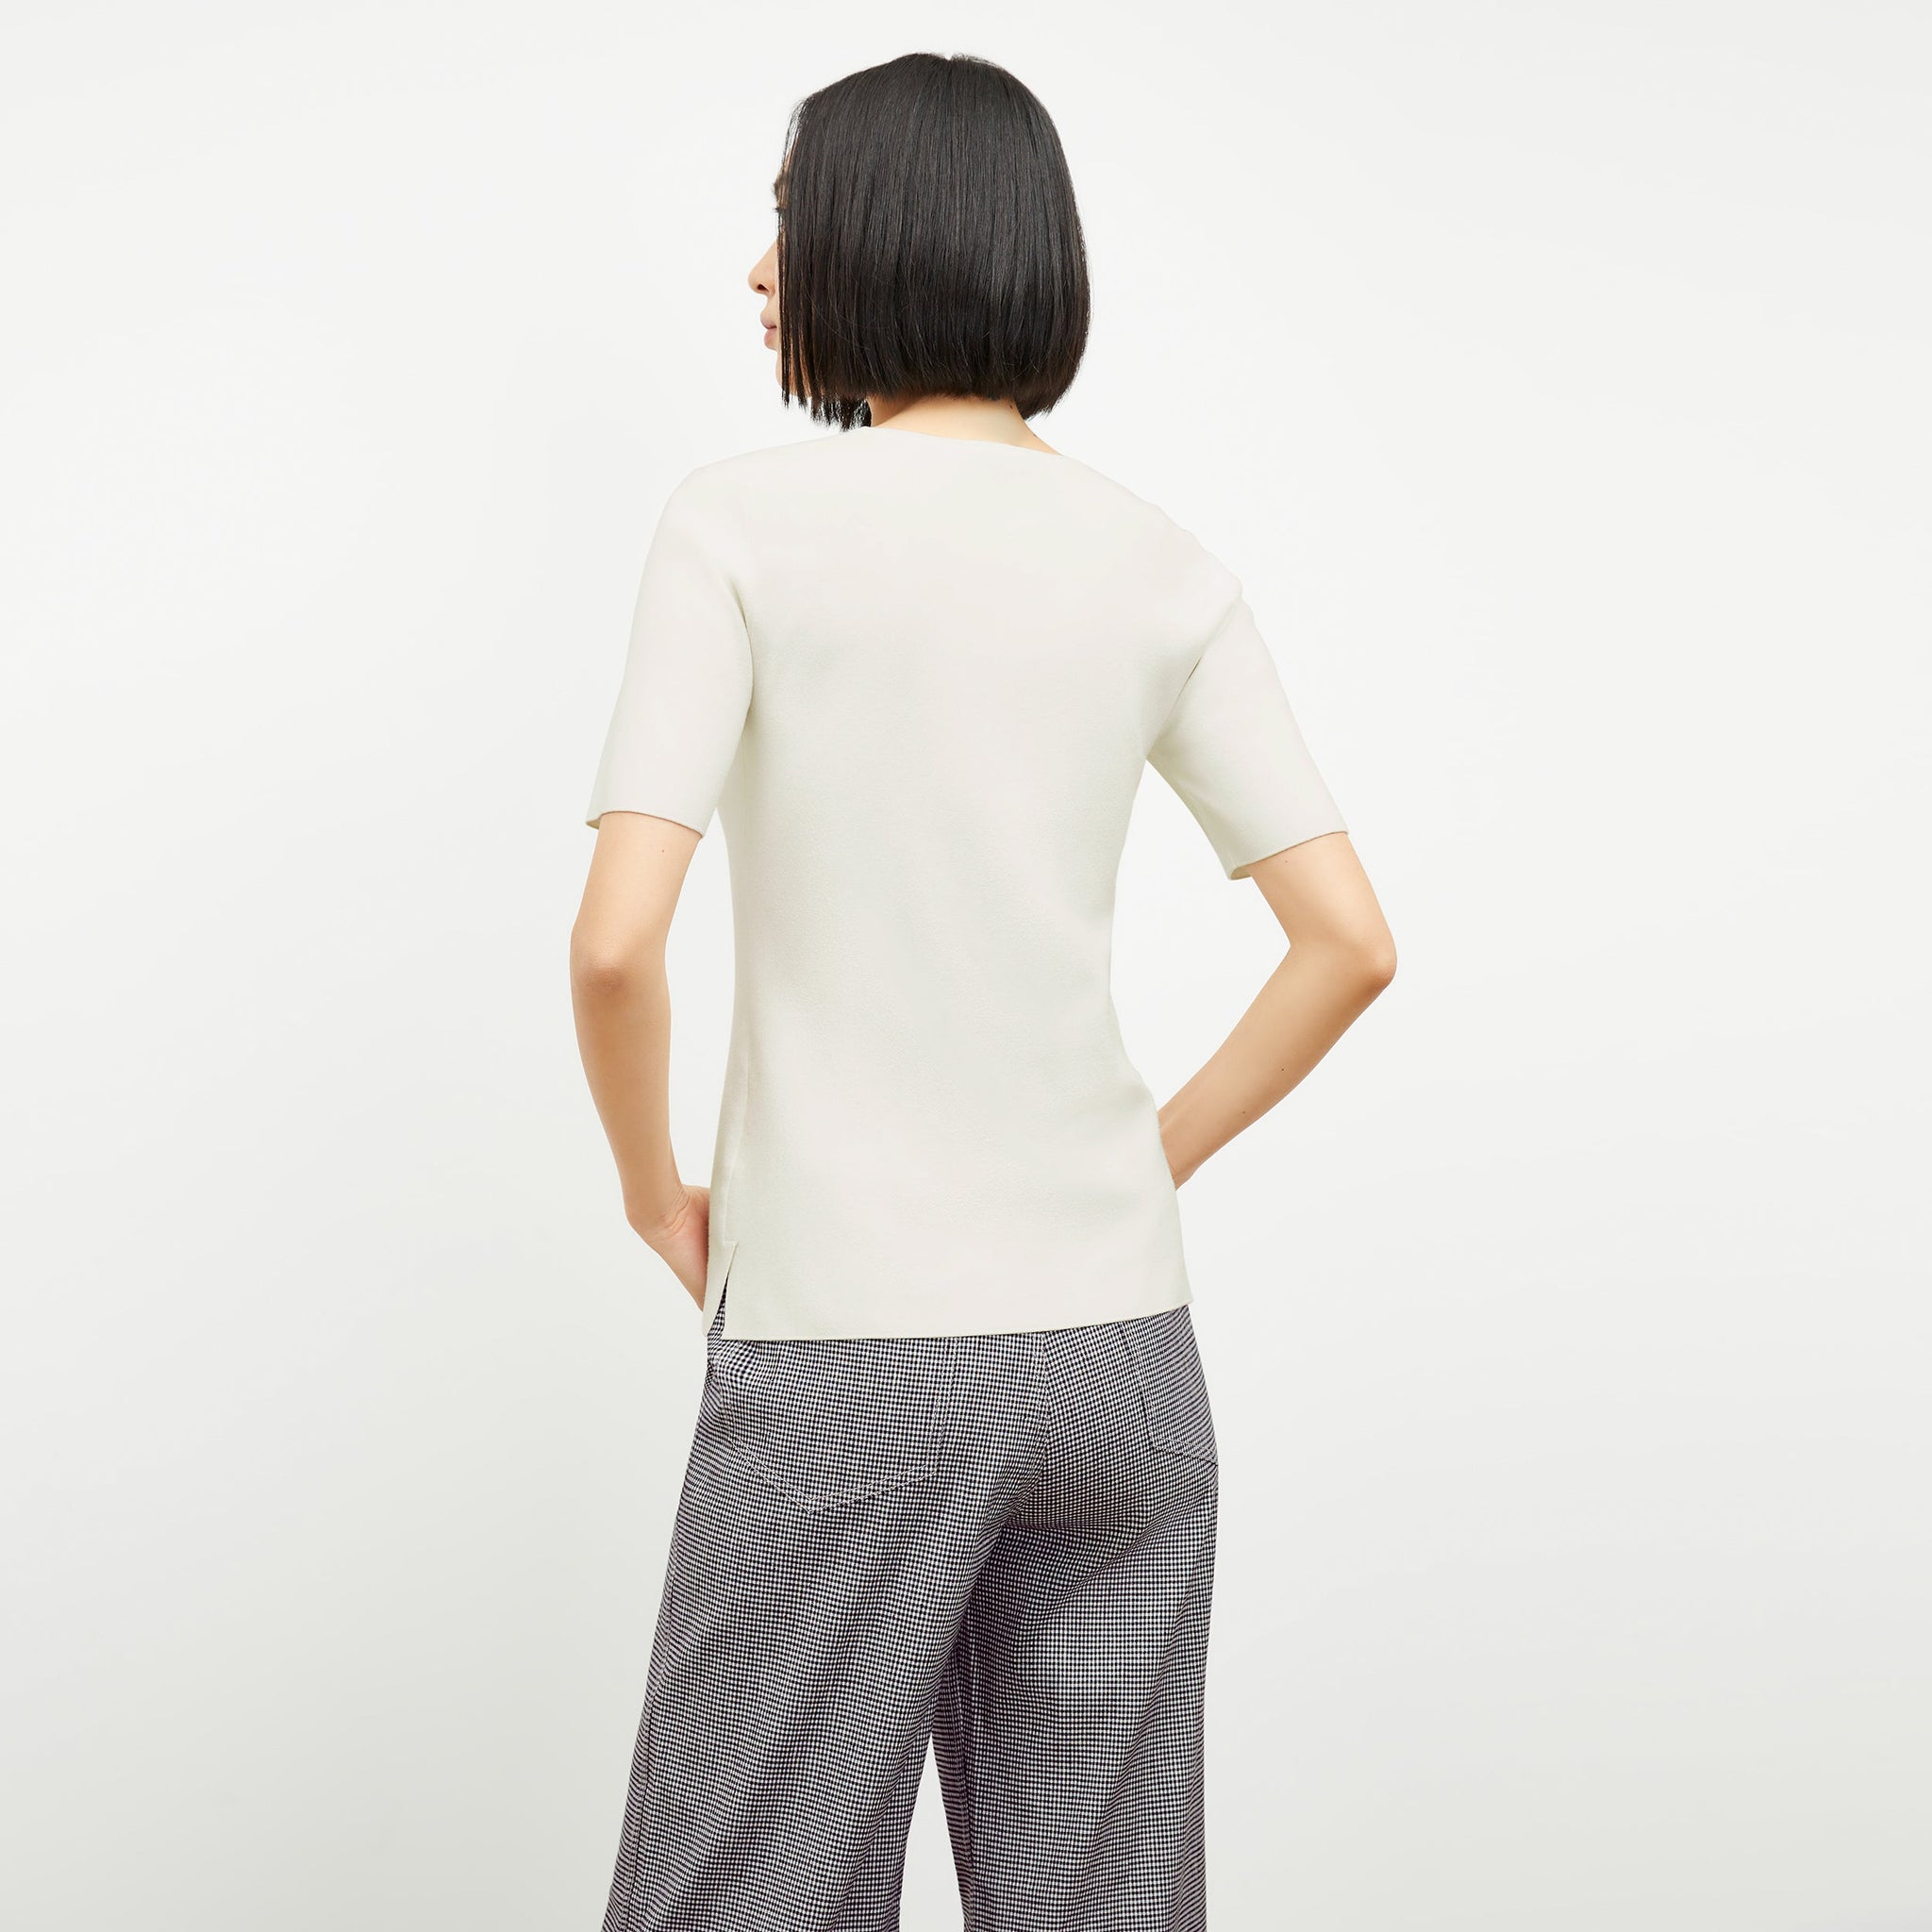 Front image of a woman standing wearing the choe top in ivory